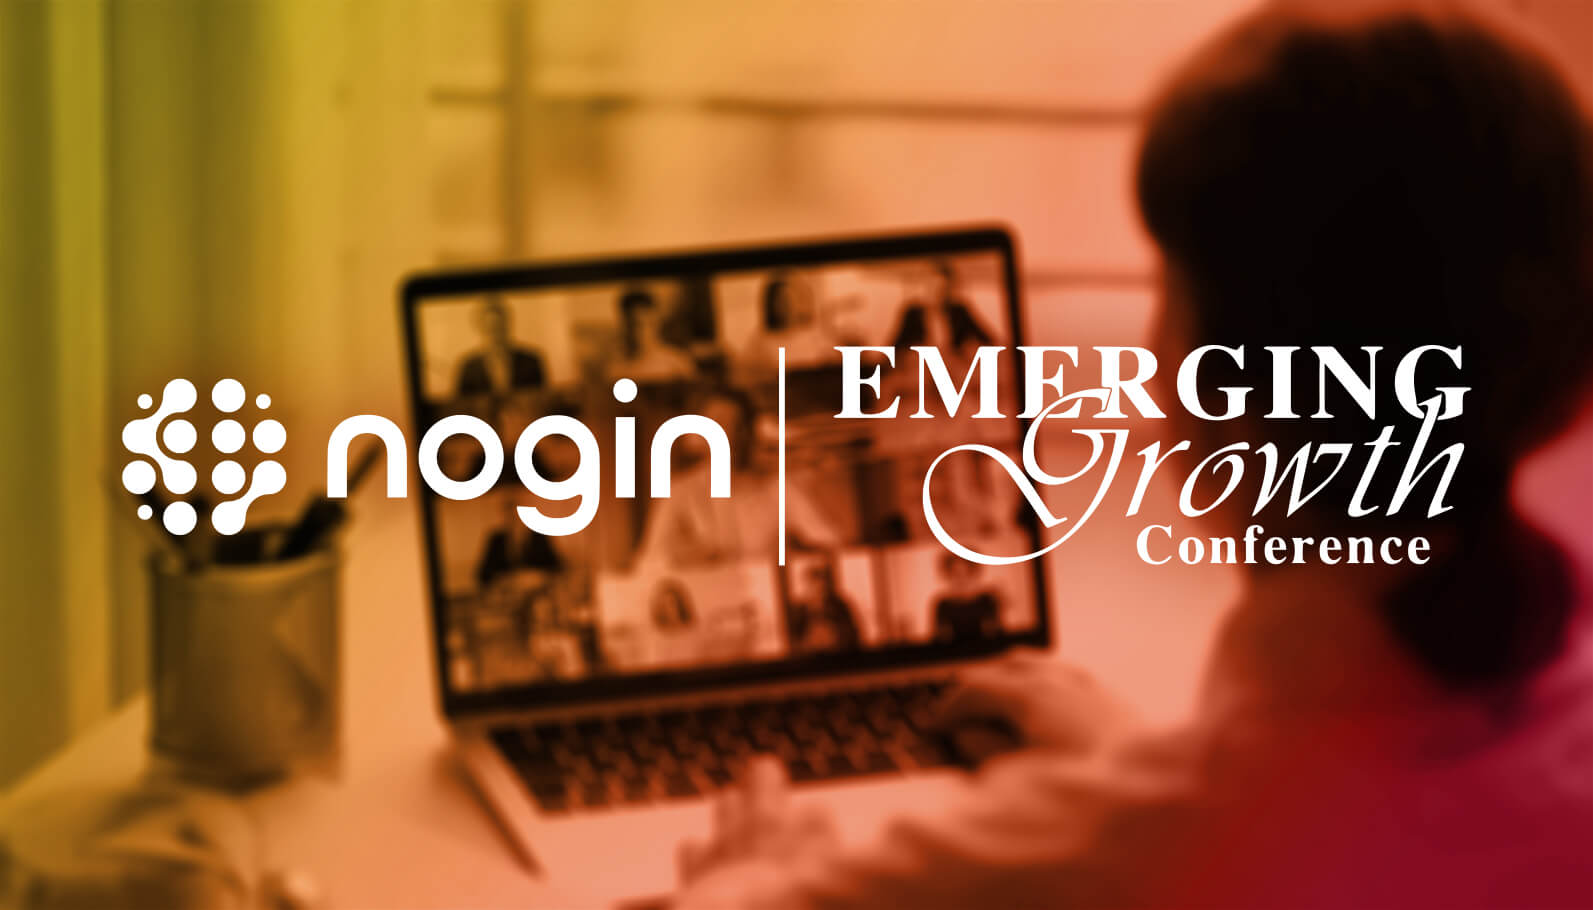 nogin emerging growth conference